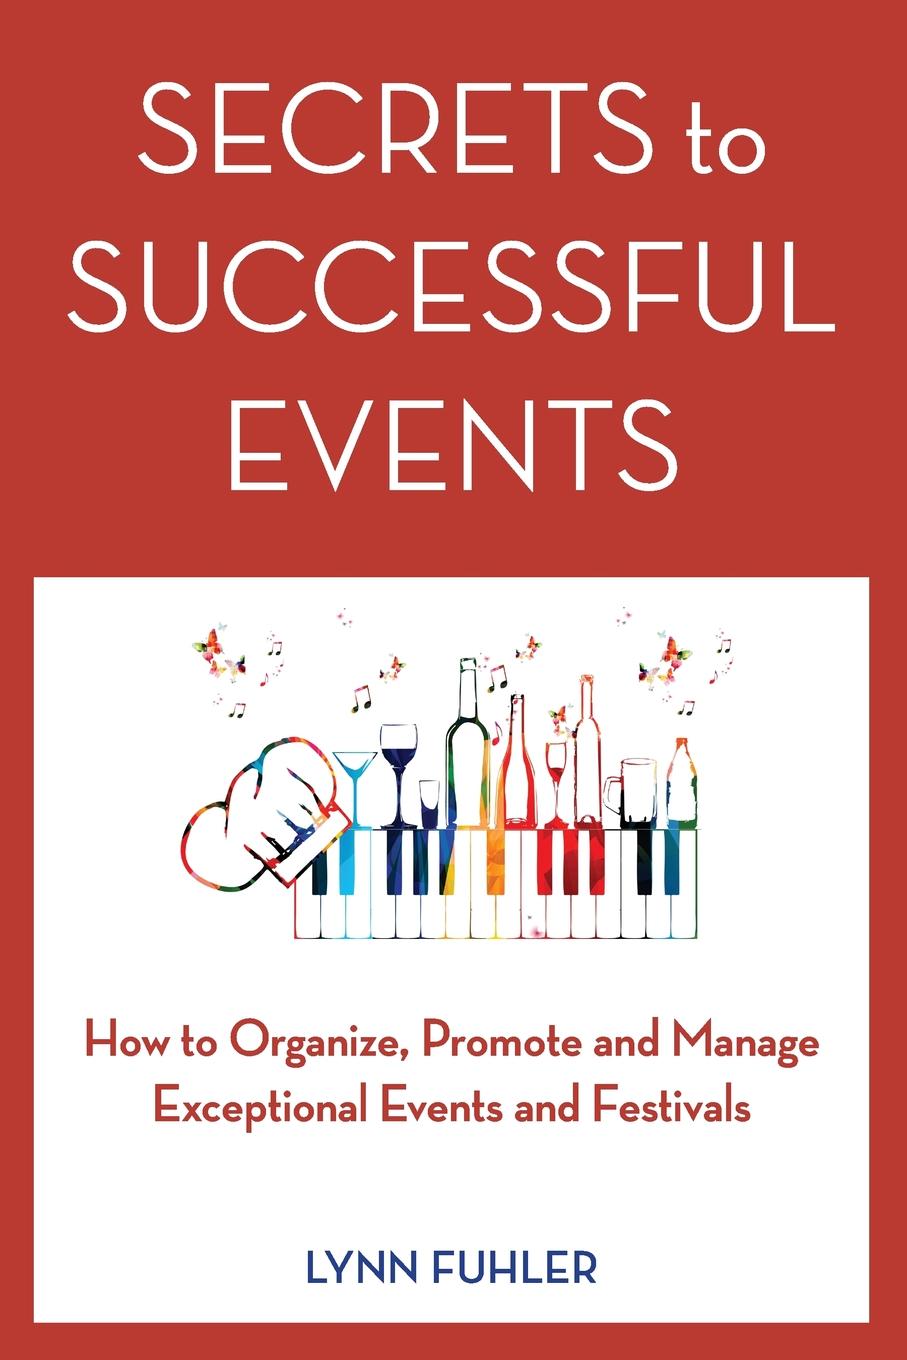 Secrets to Successful Events. How to Organize, Promote and Manage Exceptional Events and Festivals